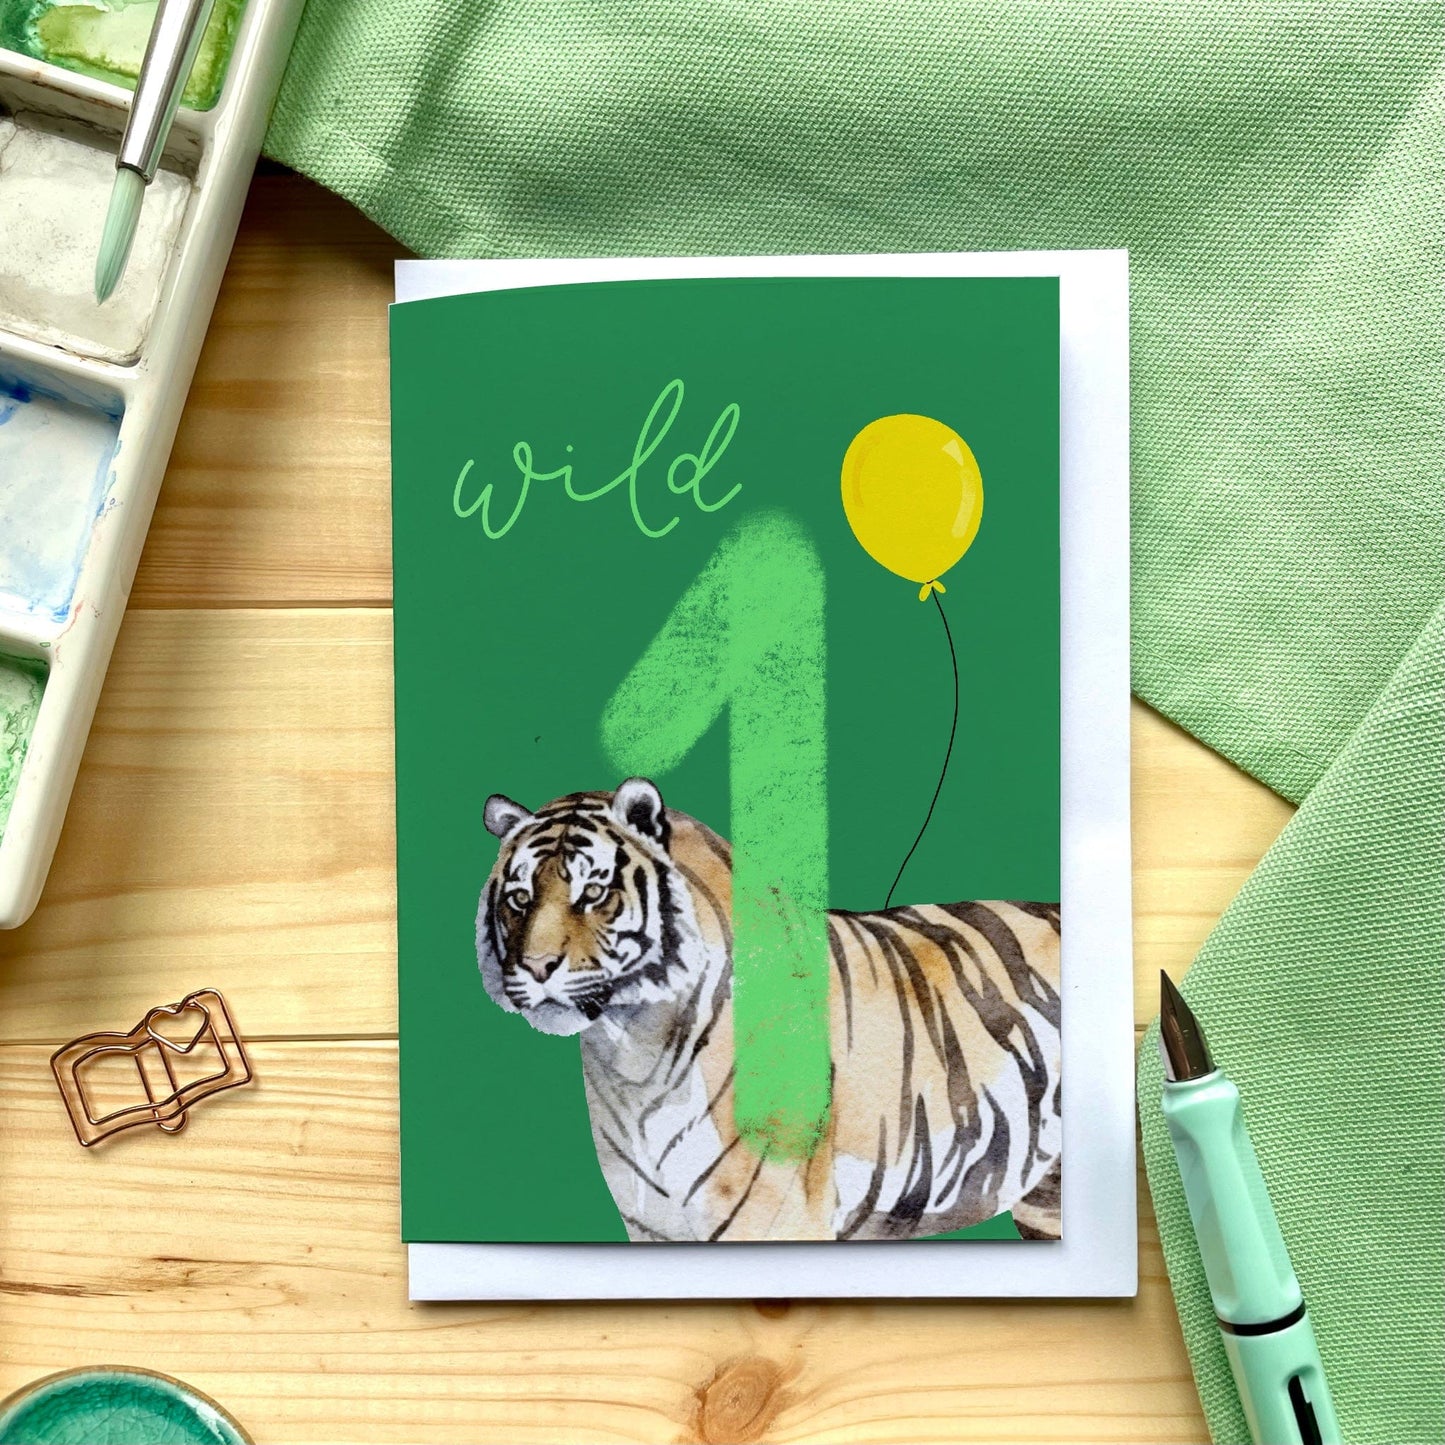 And Hope Designs Cards 1 - First birthday Card - Bright “Wild 1” with tiger